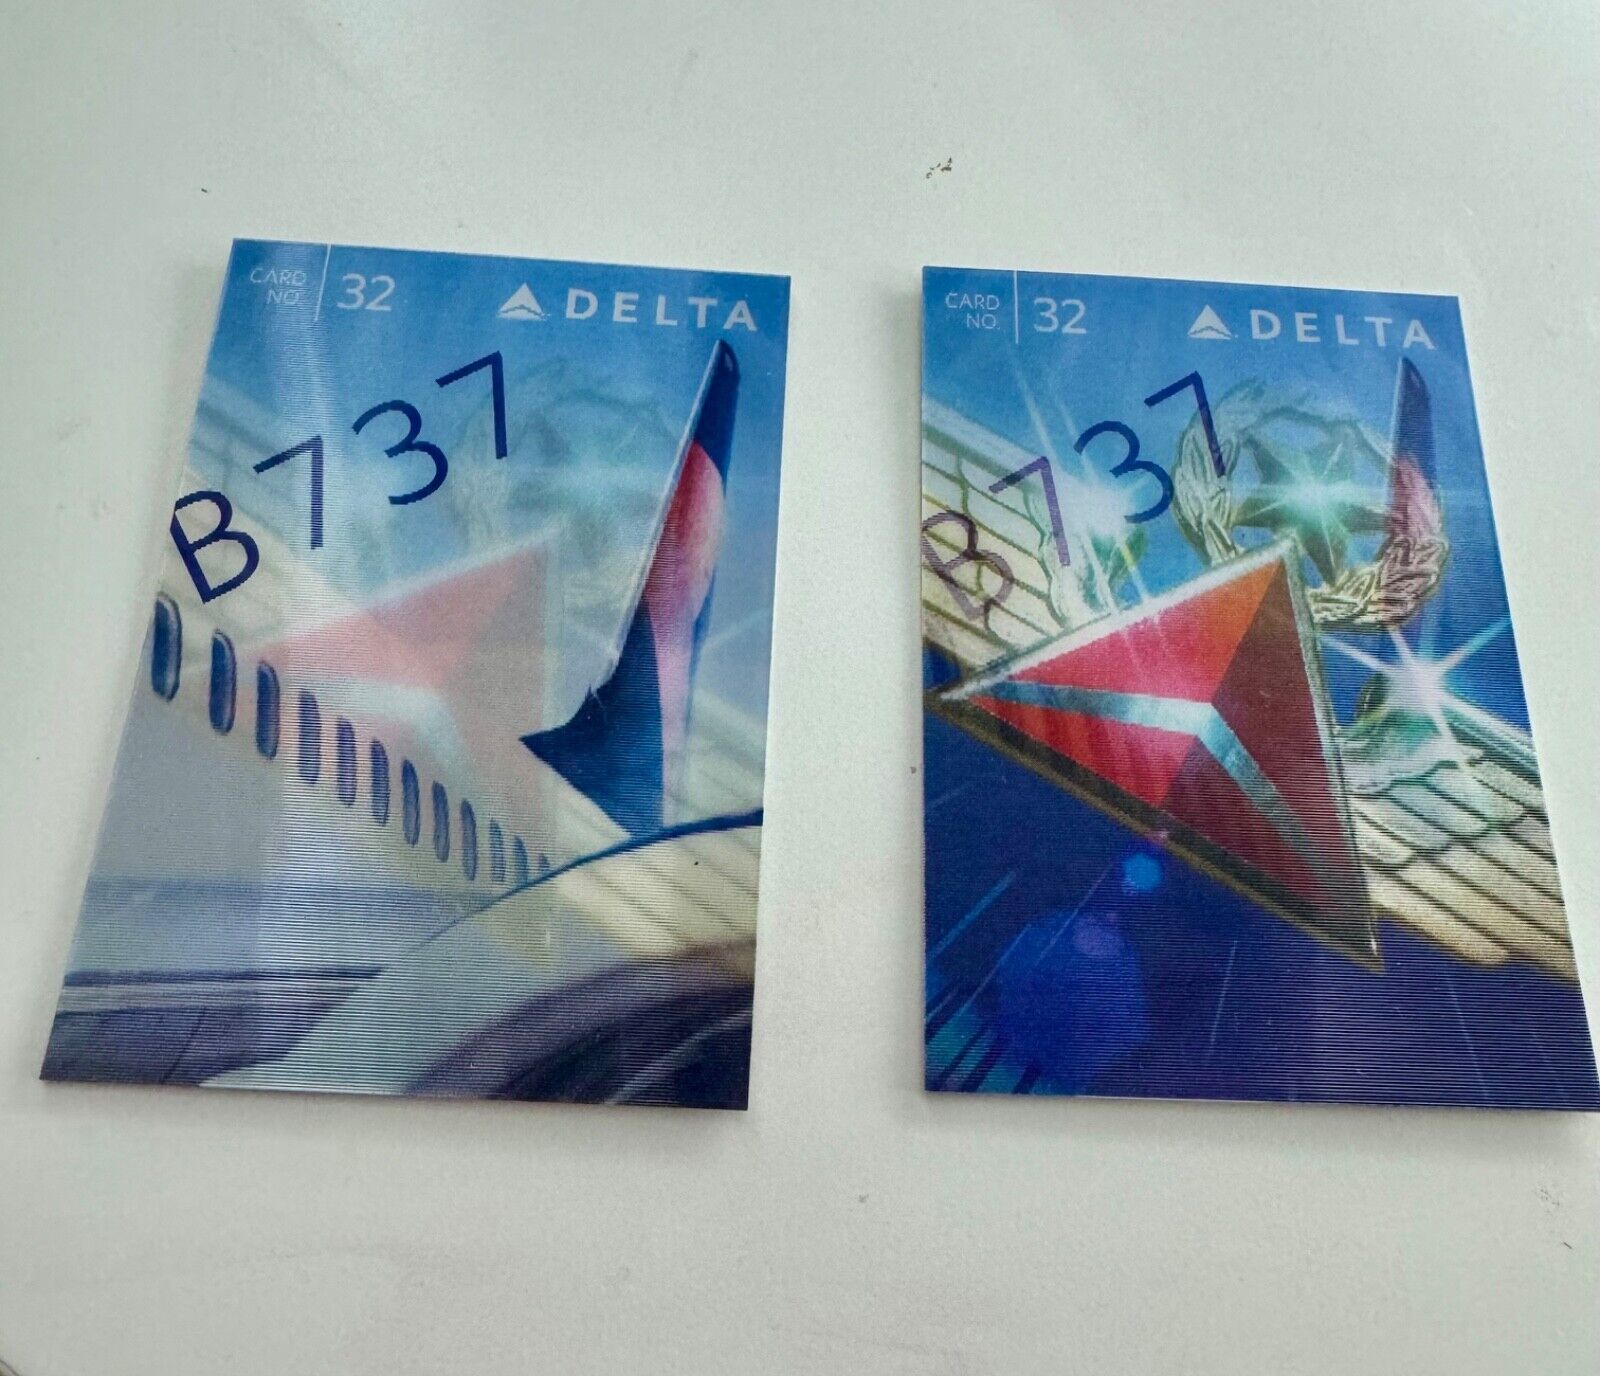 2015 Delta Air Lines Trading Card Boeing 737 Holographic (Card #32)